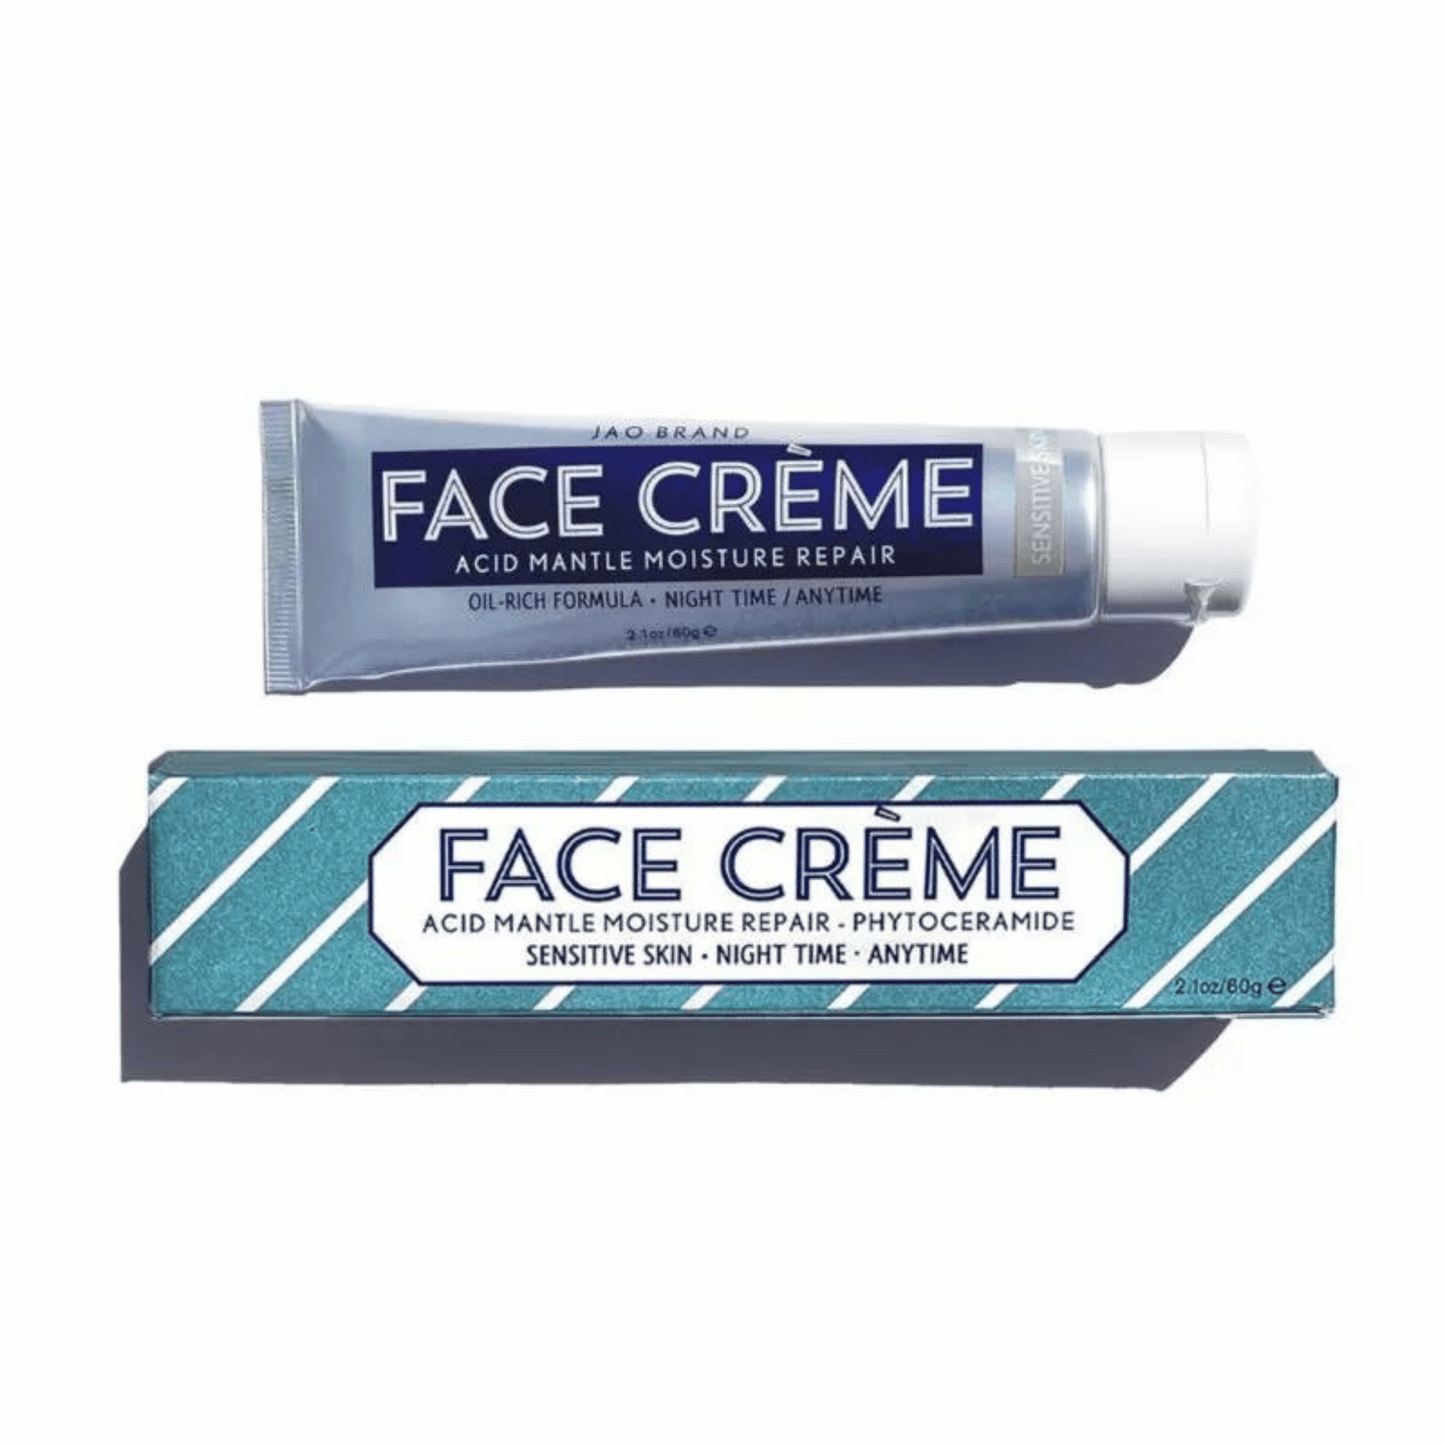 Primary Image of Sensitive Skin Face Creme